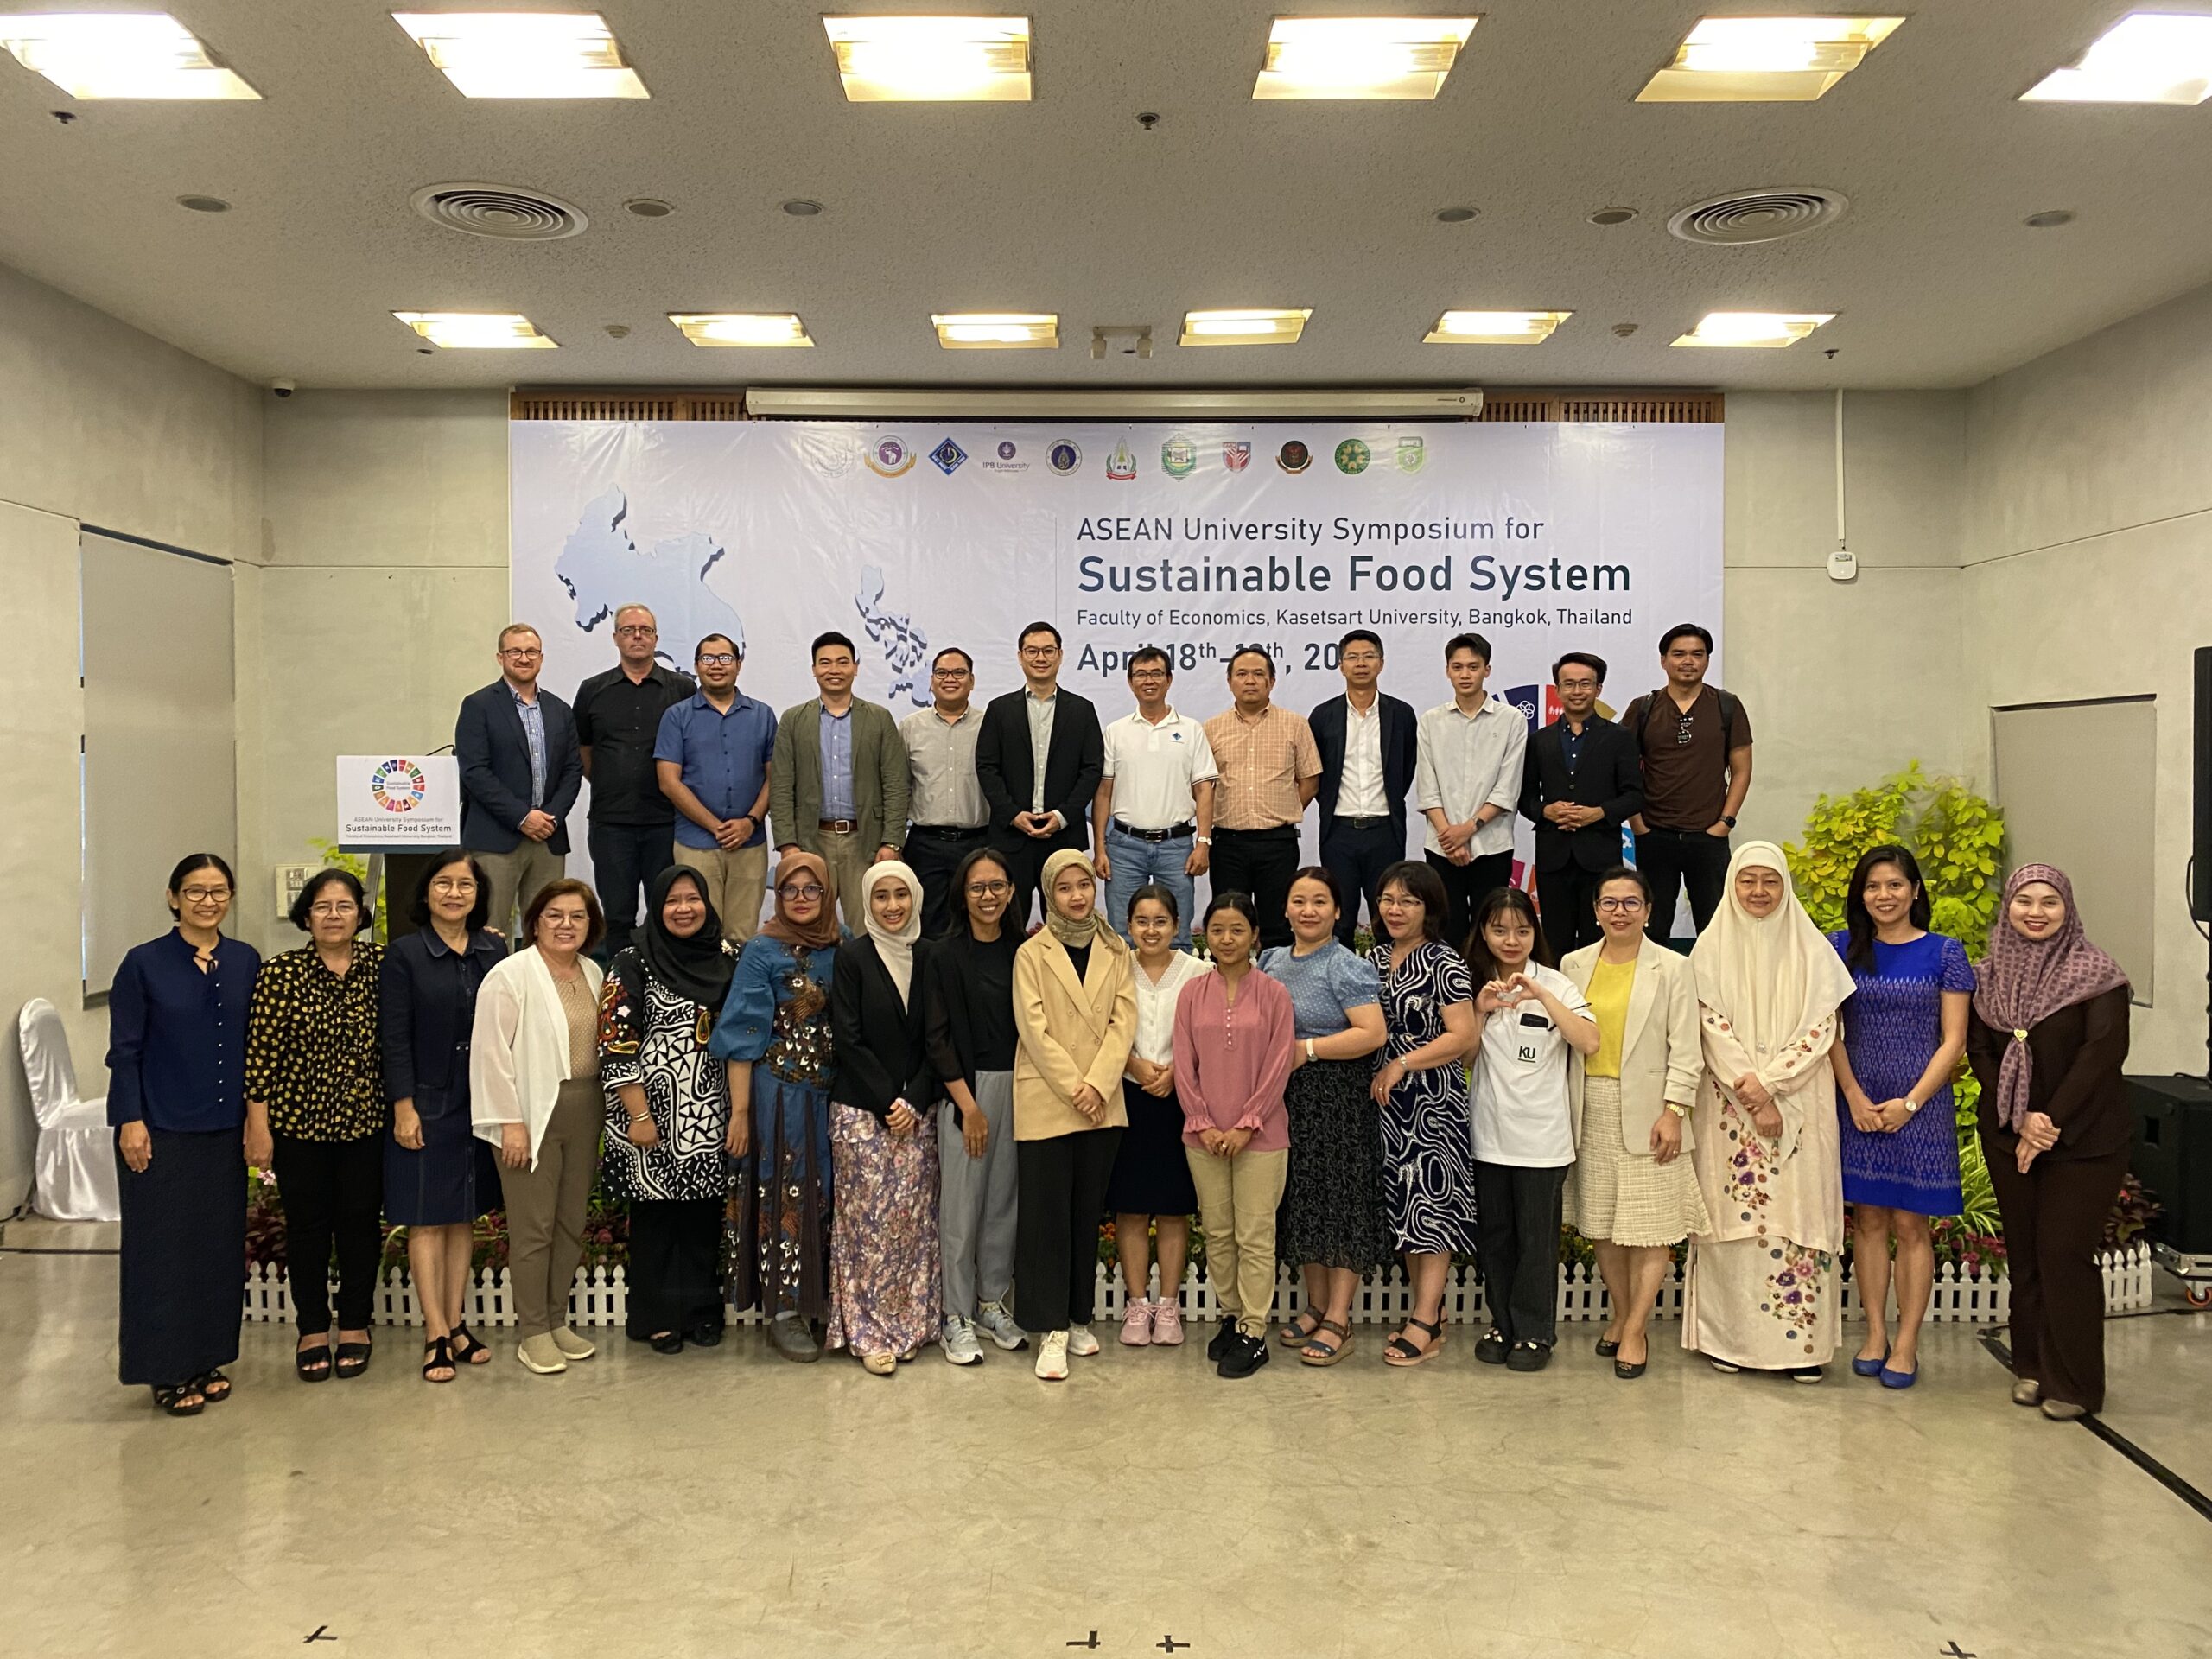 UPLB’s CEM Delegation Excels in ASEAN University Symposium for Sustainable Food System